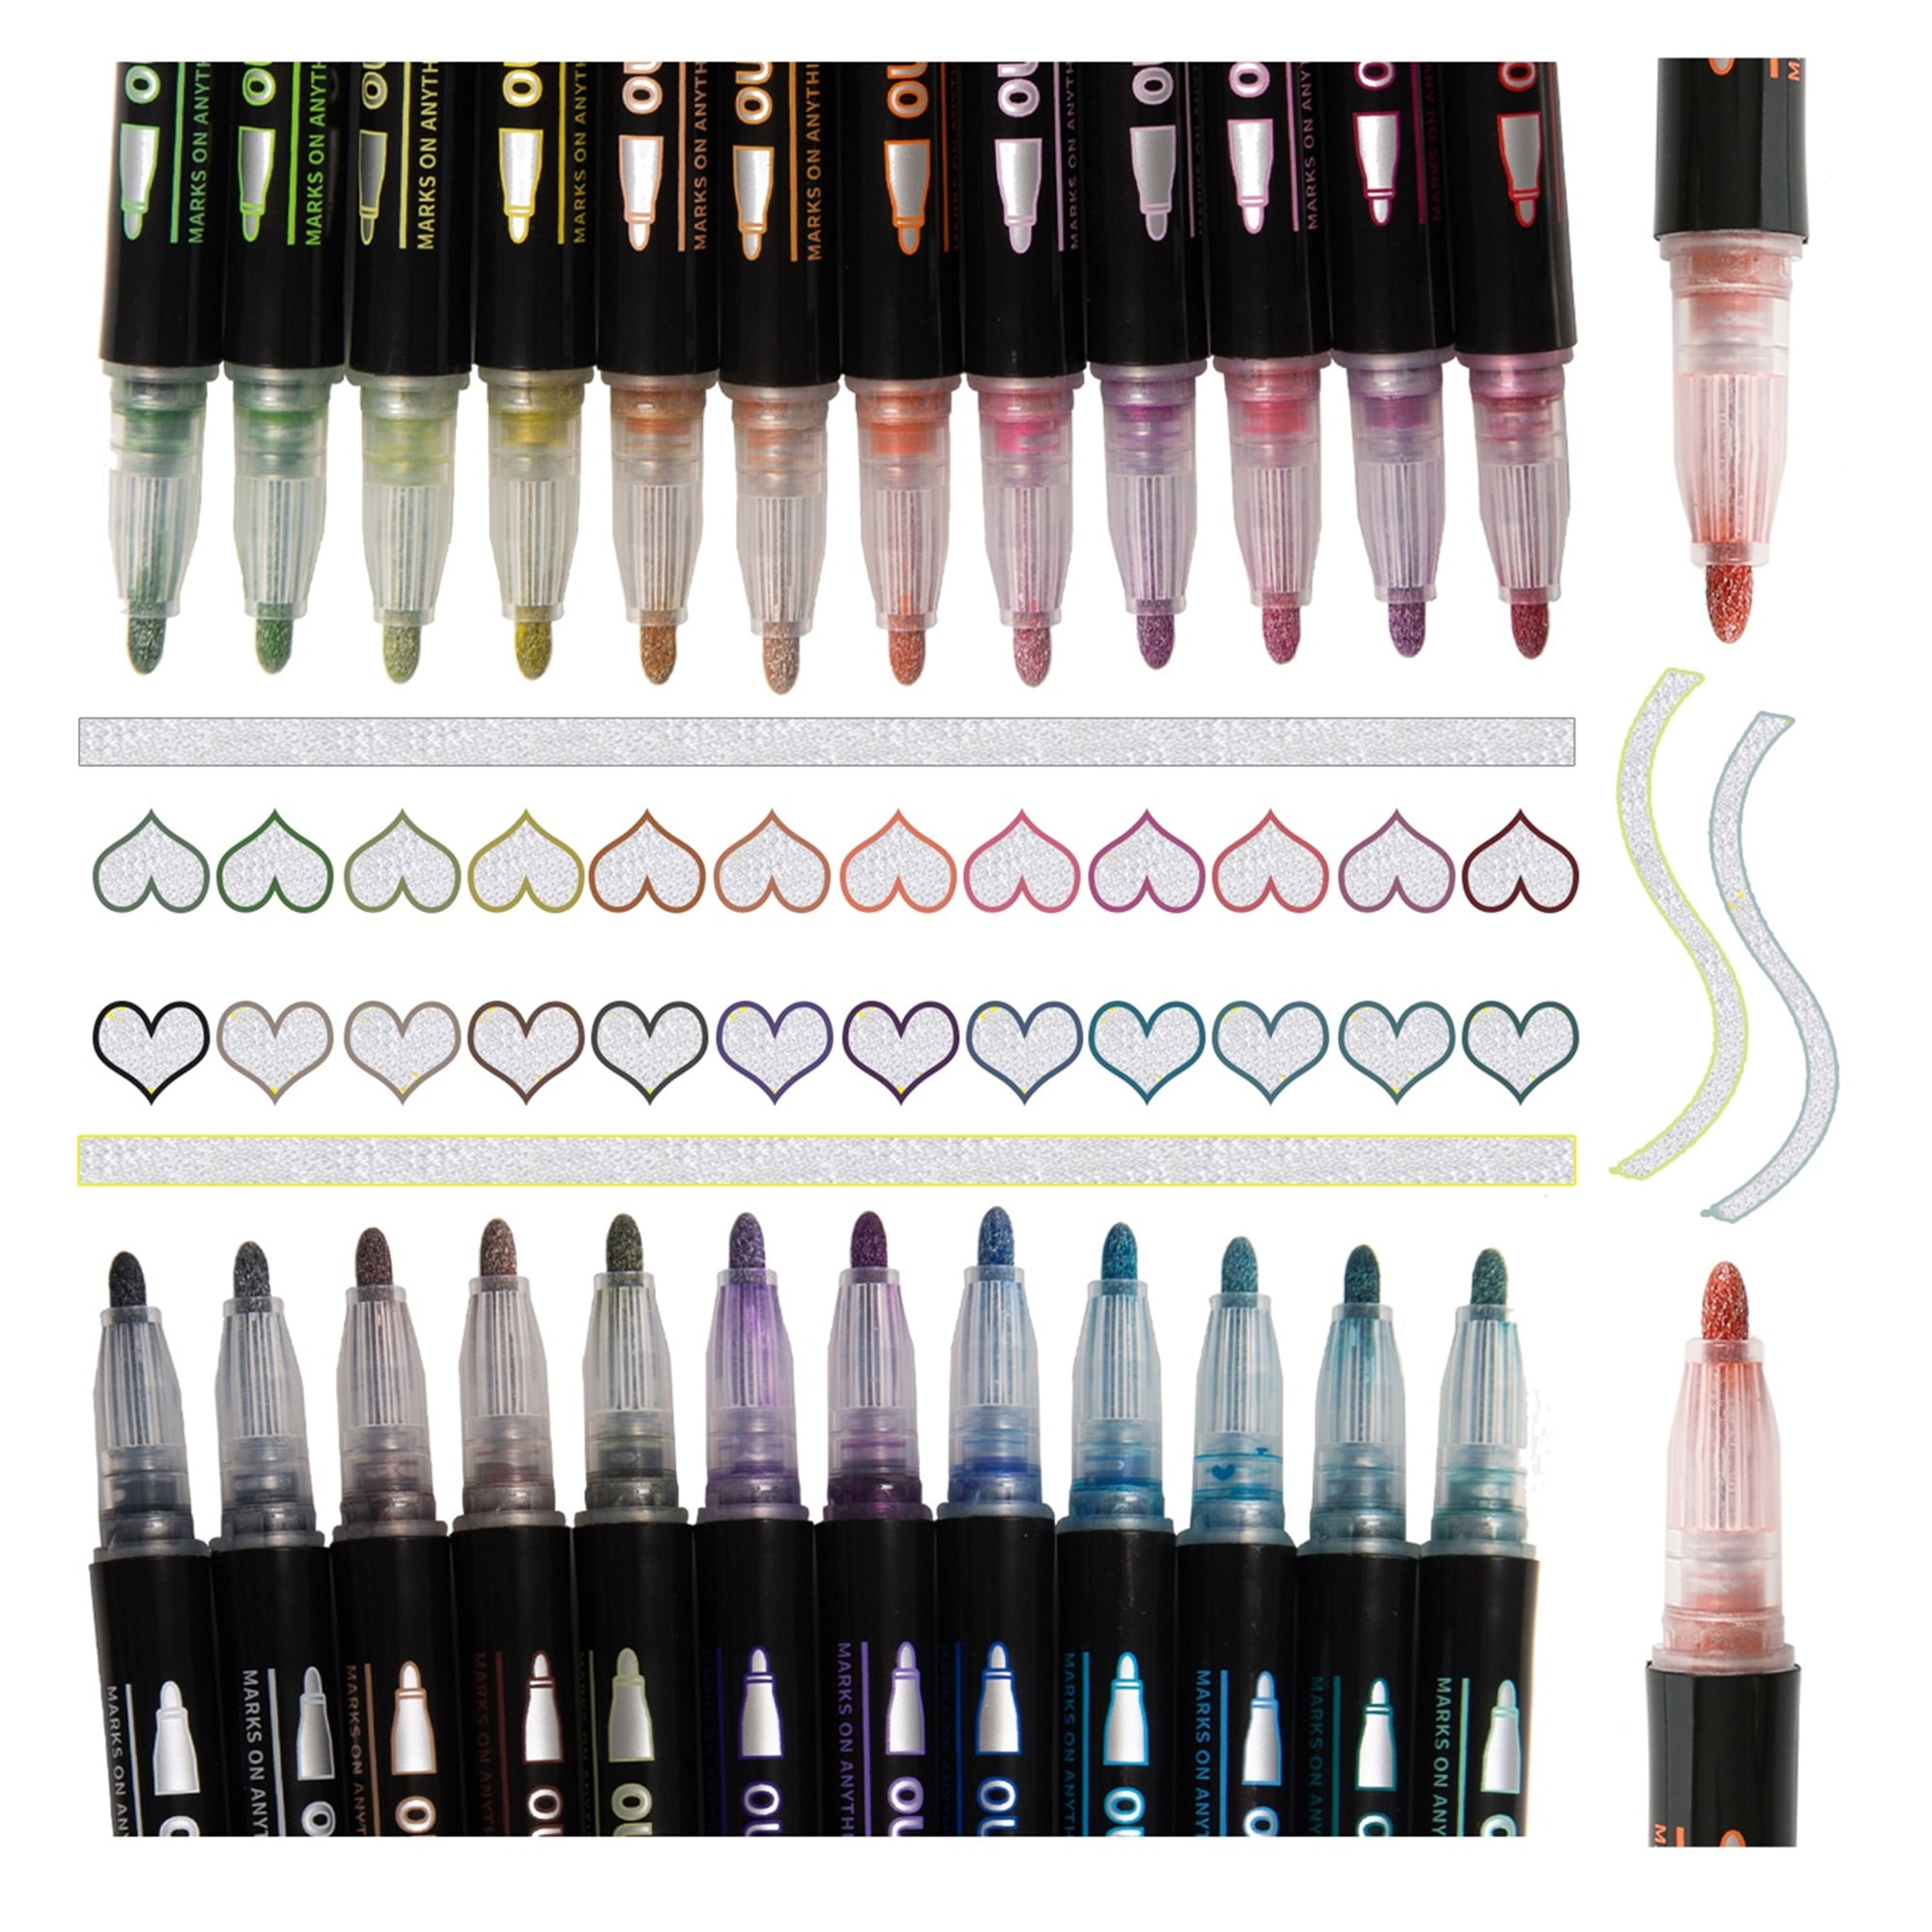 12 Color Double Line Outline Marker Pens, Super Squiggles Outline Pens 3mm Thick Doodle Glitter Markers, Shimmer Colored Pens, Metallic Paint